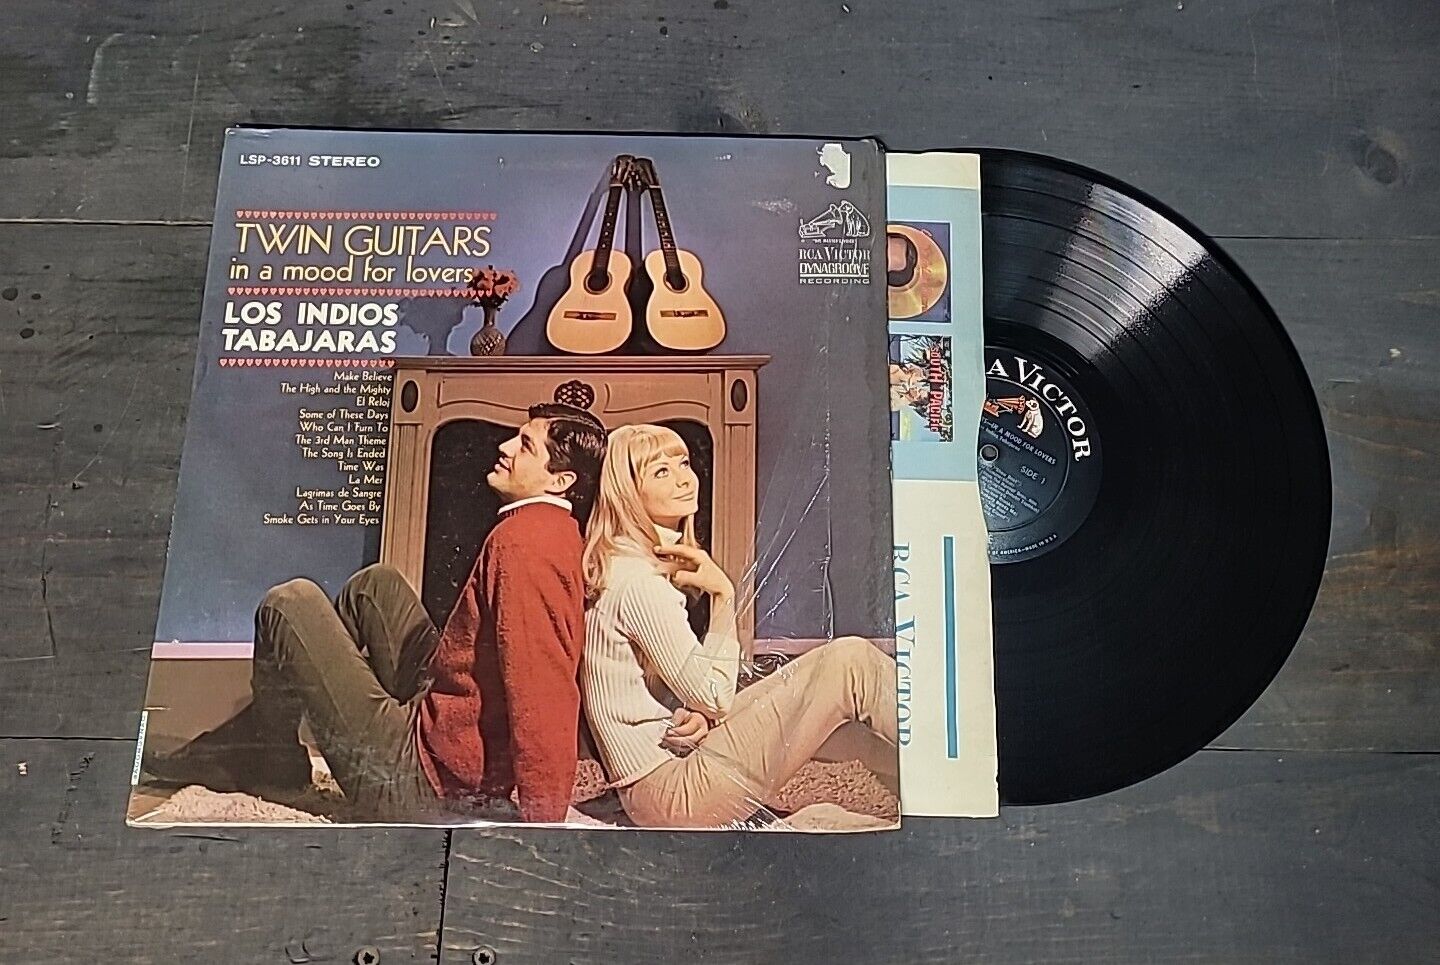 Vinyl LP: Los Indios Tabajaras, “Twin Guitars In A Mood For Lovers” 1966 Stereo